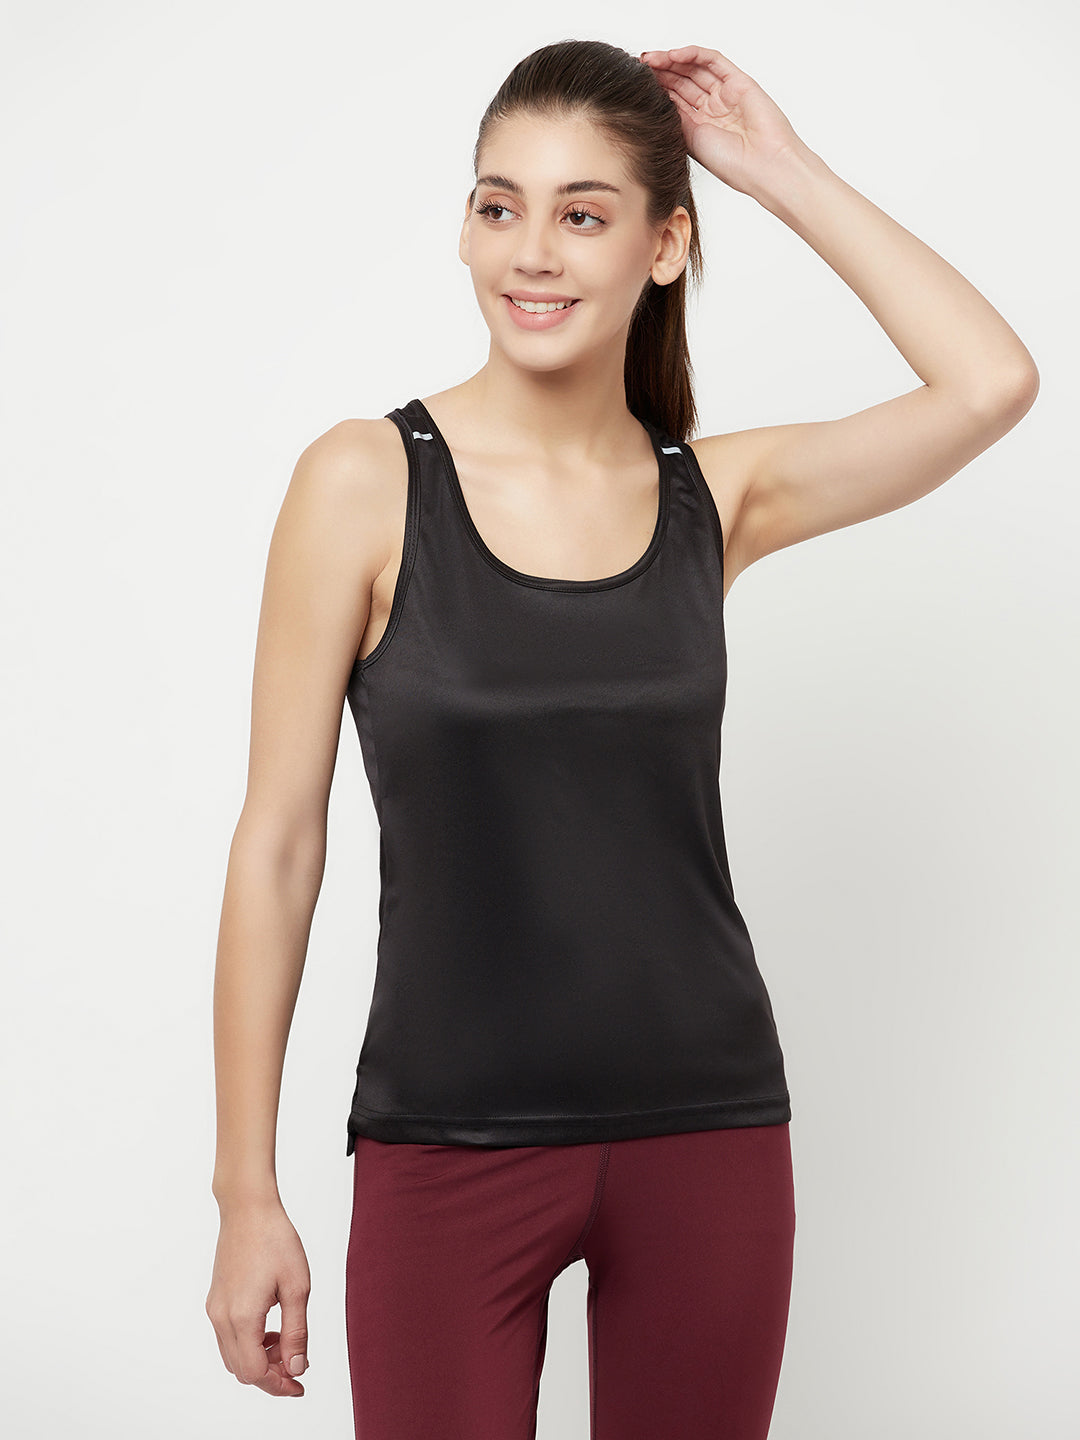 NKOOGH Thermal Undershirt for Women Cropped Exercise Top Ladies